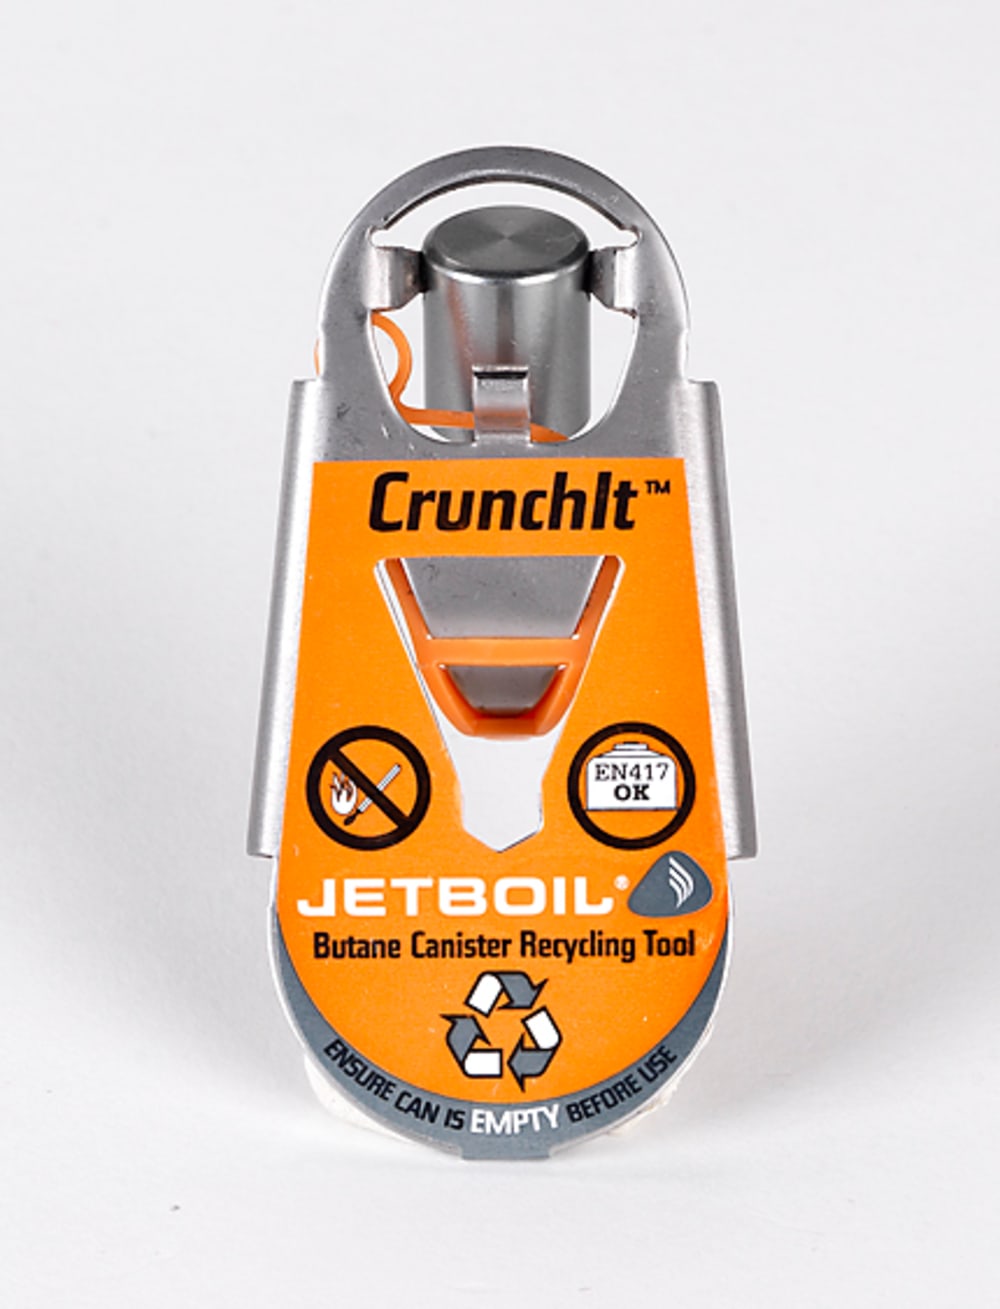 Jetboil Crunchit Butane Canister Recycling Tool